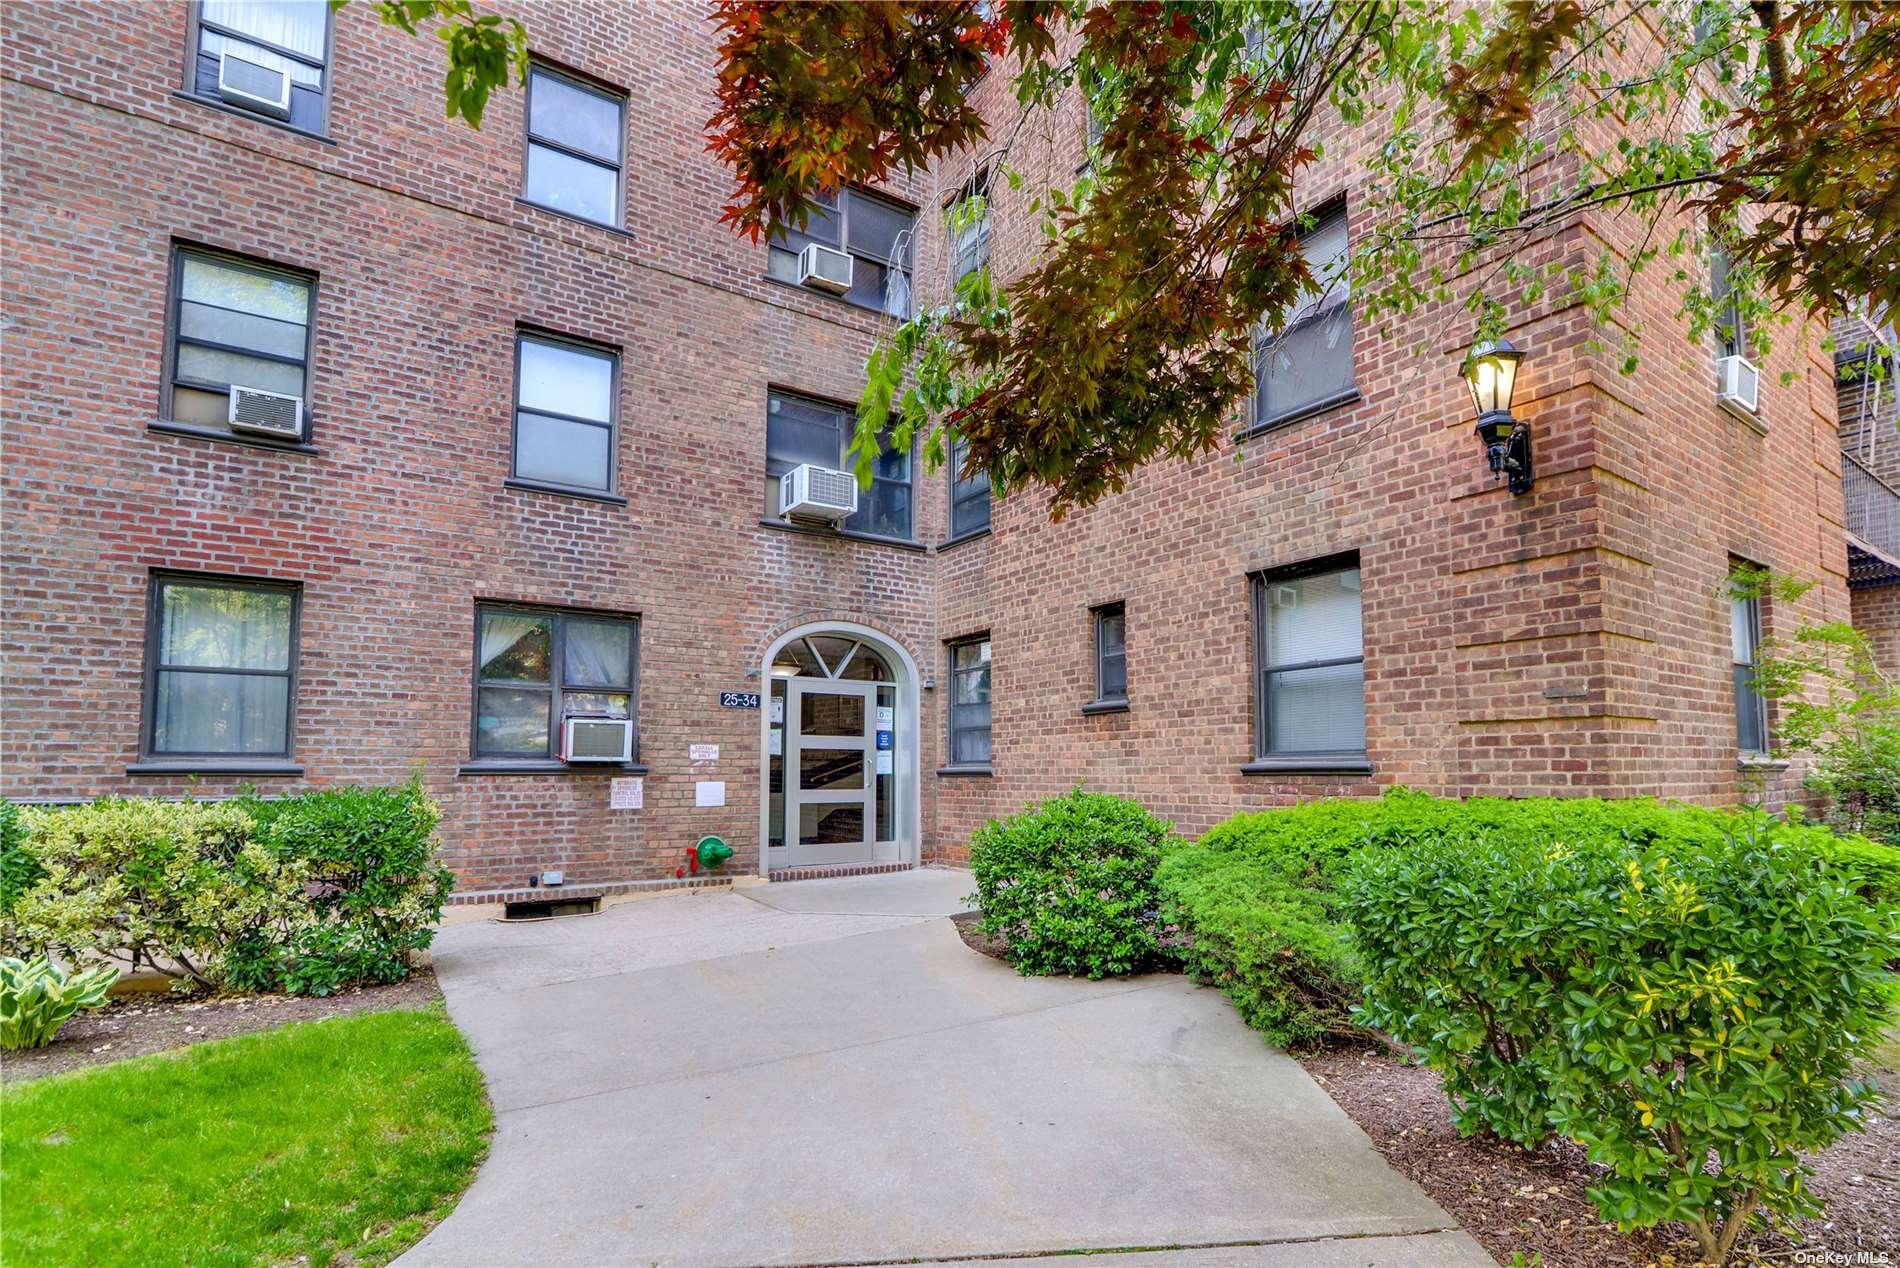 26-16 Union Street #4B in Queens, Flushing, NY 11354